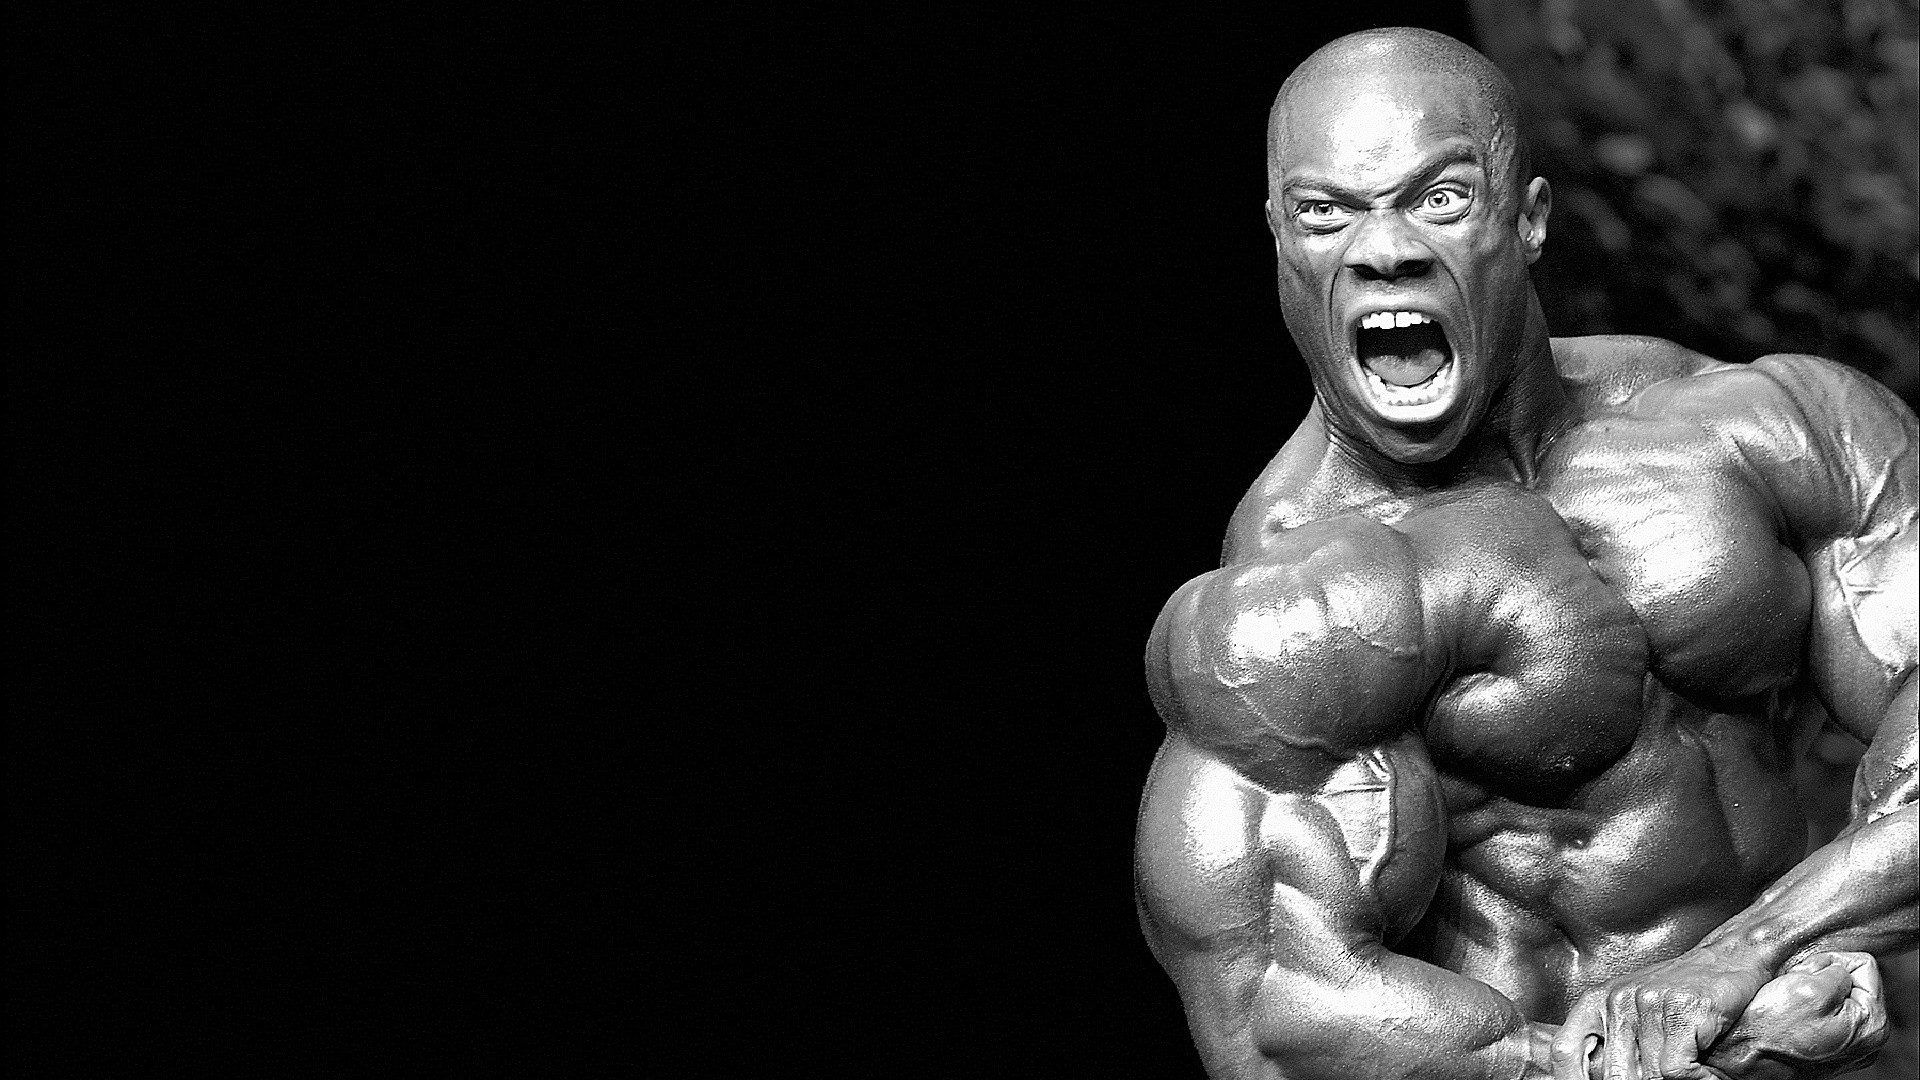 1920x1080 Fitness, Man, Muscle, Bodybuilding, Phil Heath, Mr Olympia, Muscle Phil